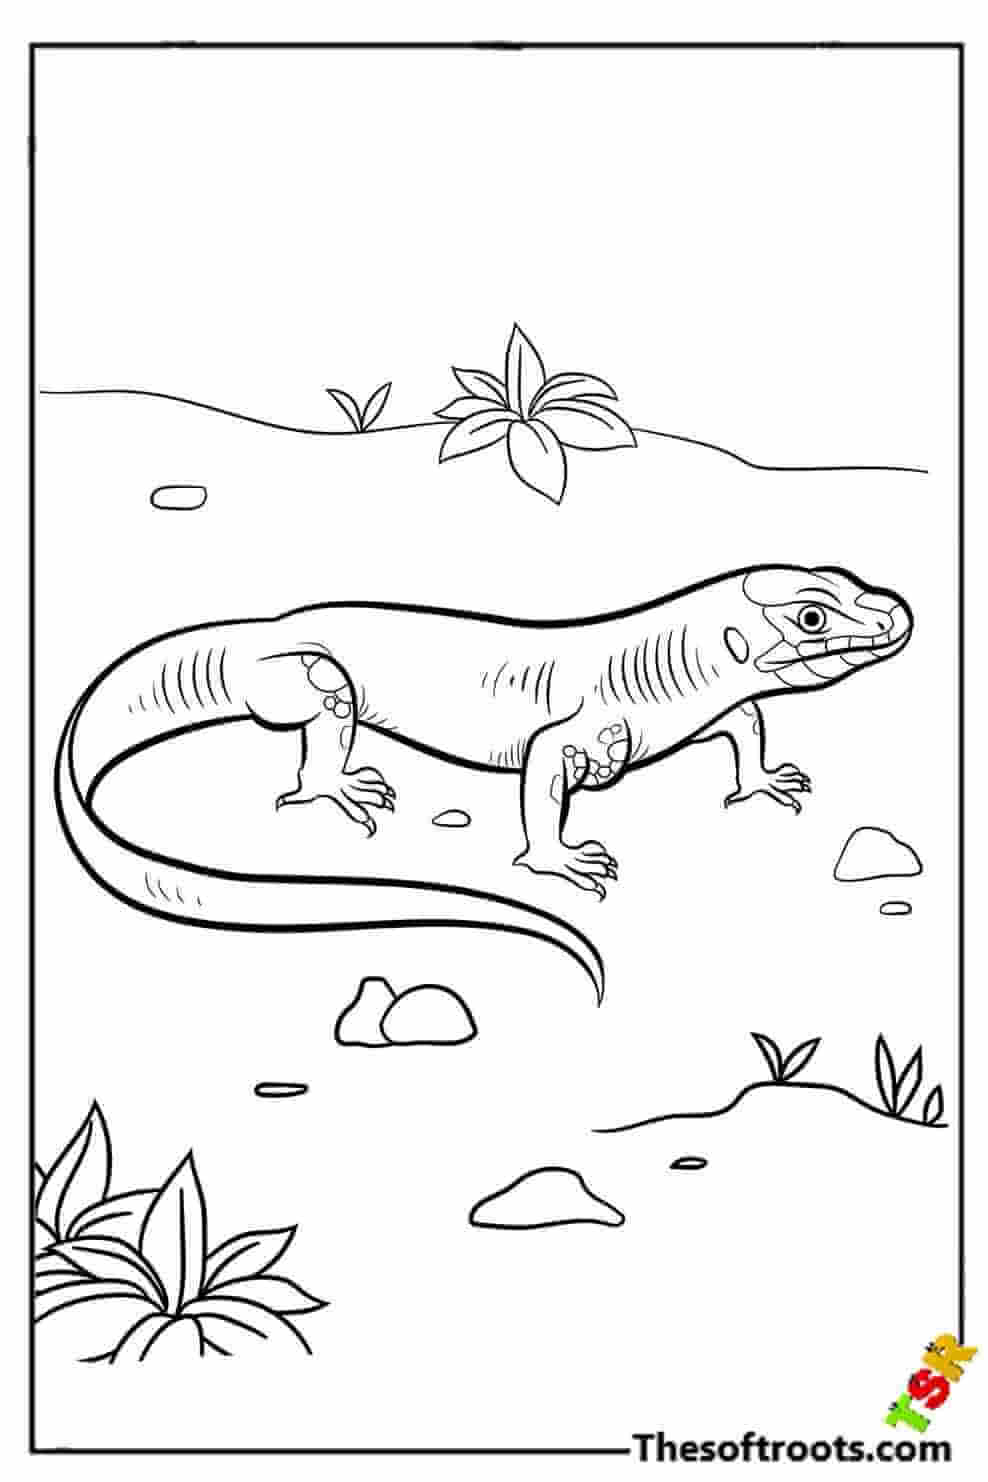 Lizard is enjoying coloring pages